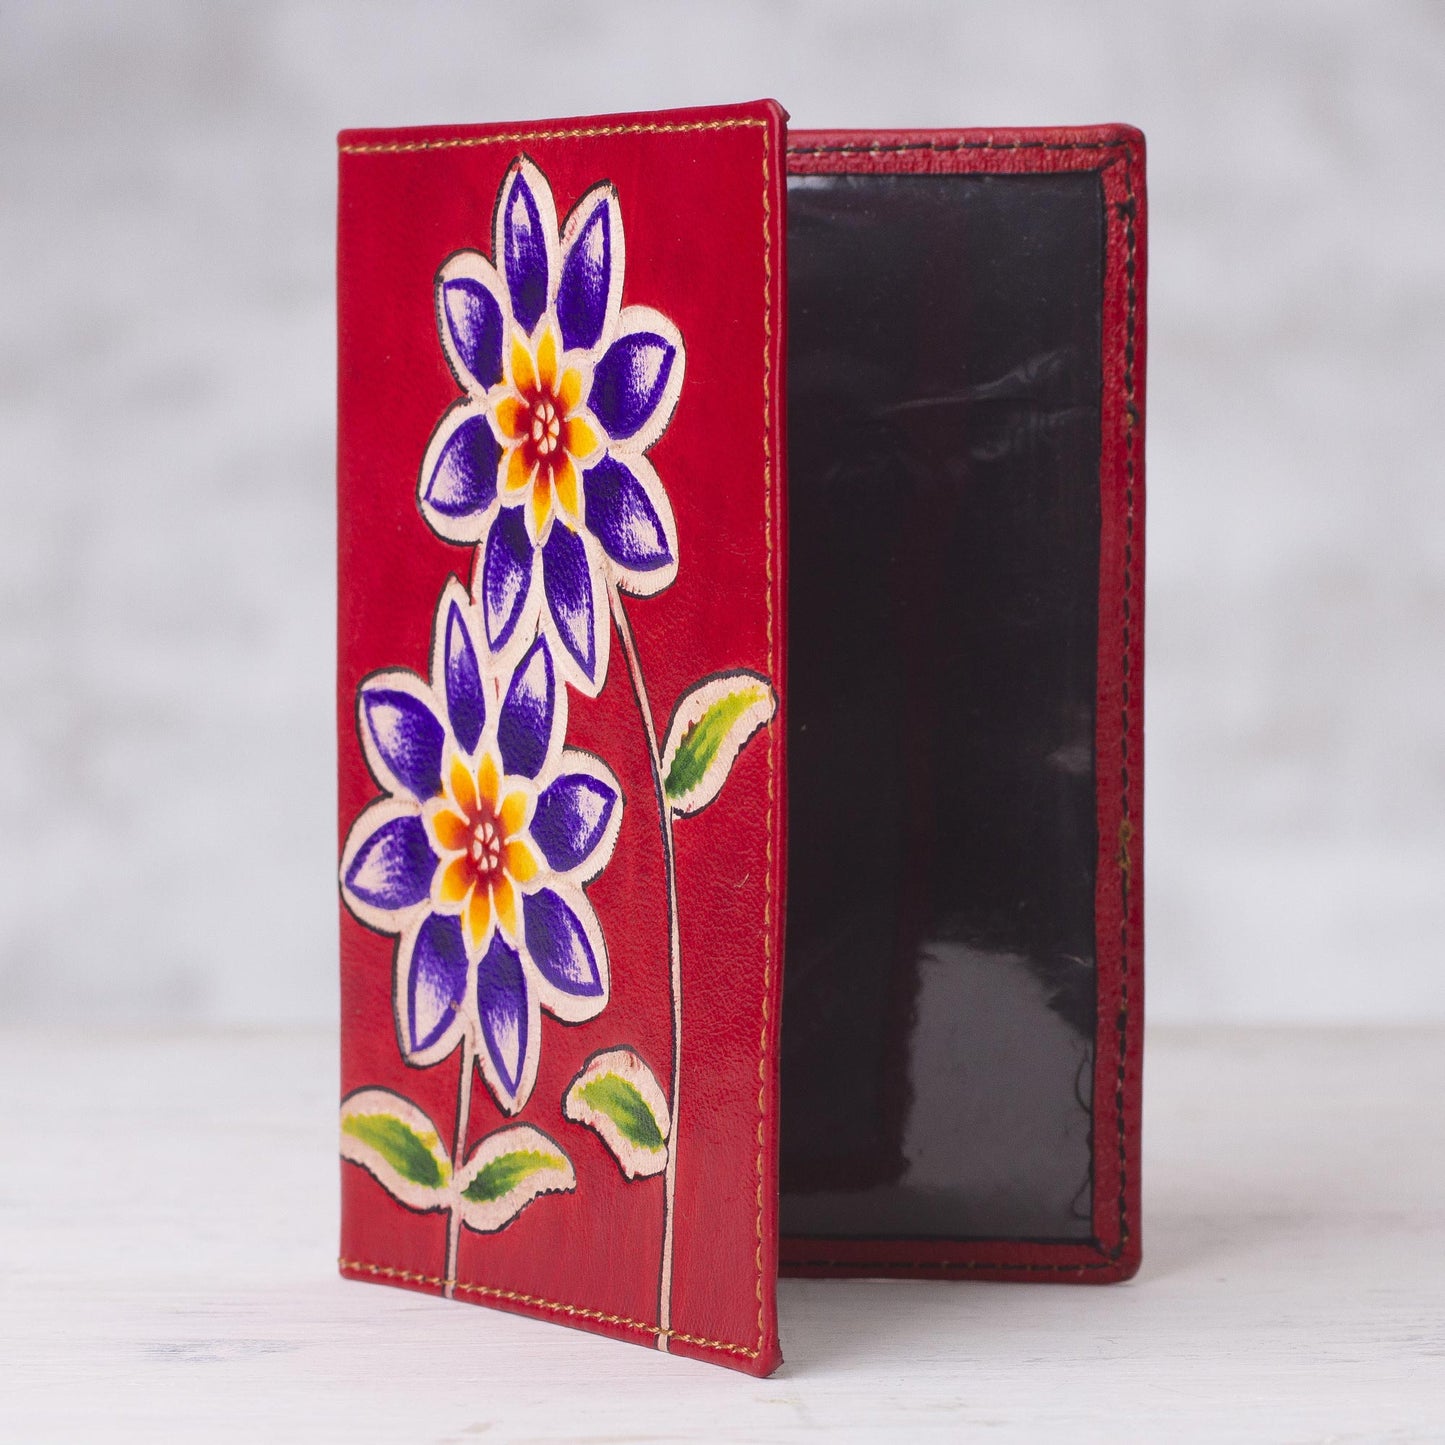 Lovely Traveler in Red Red Leather Passport Cover with Hand Painted Flowers